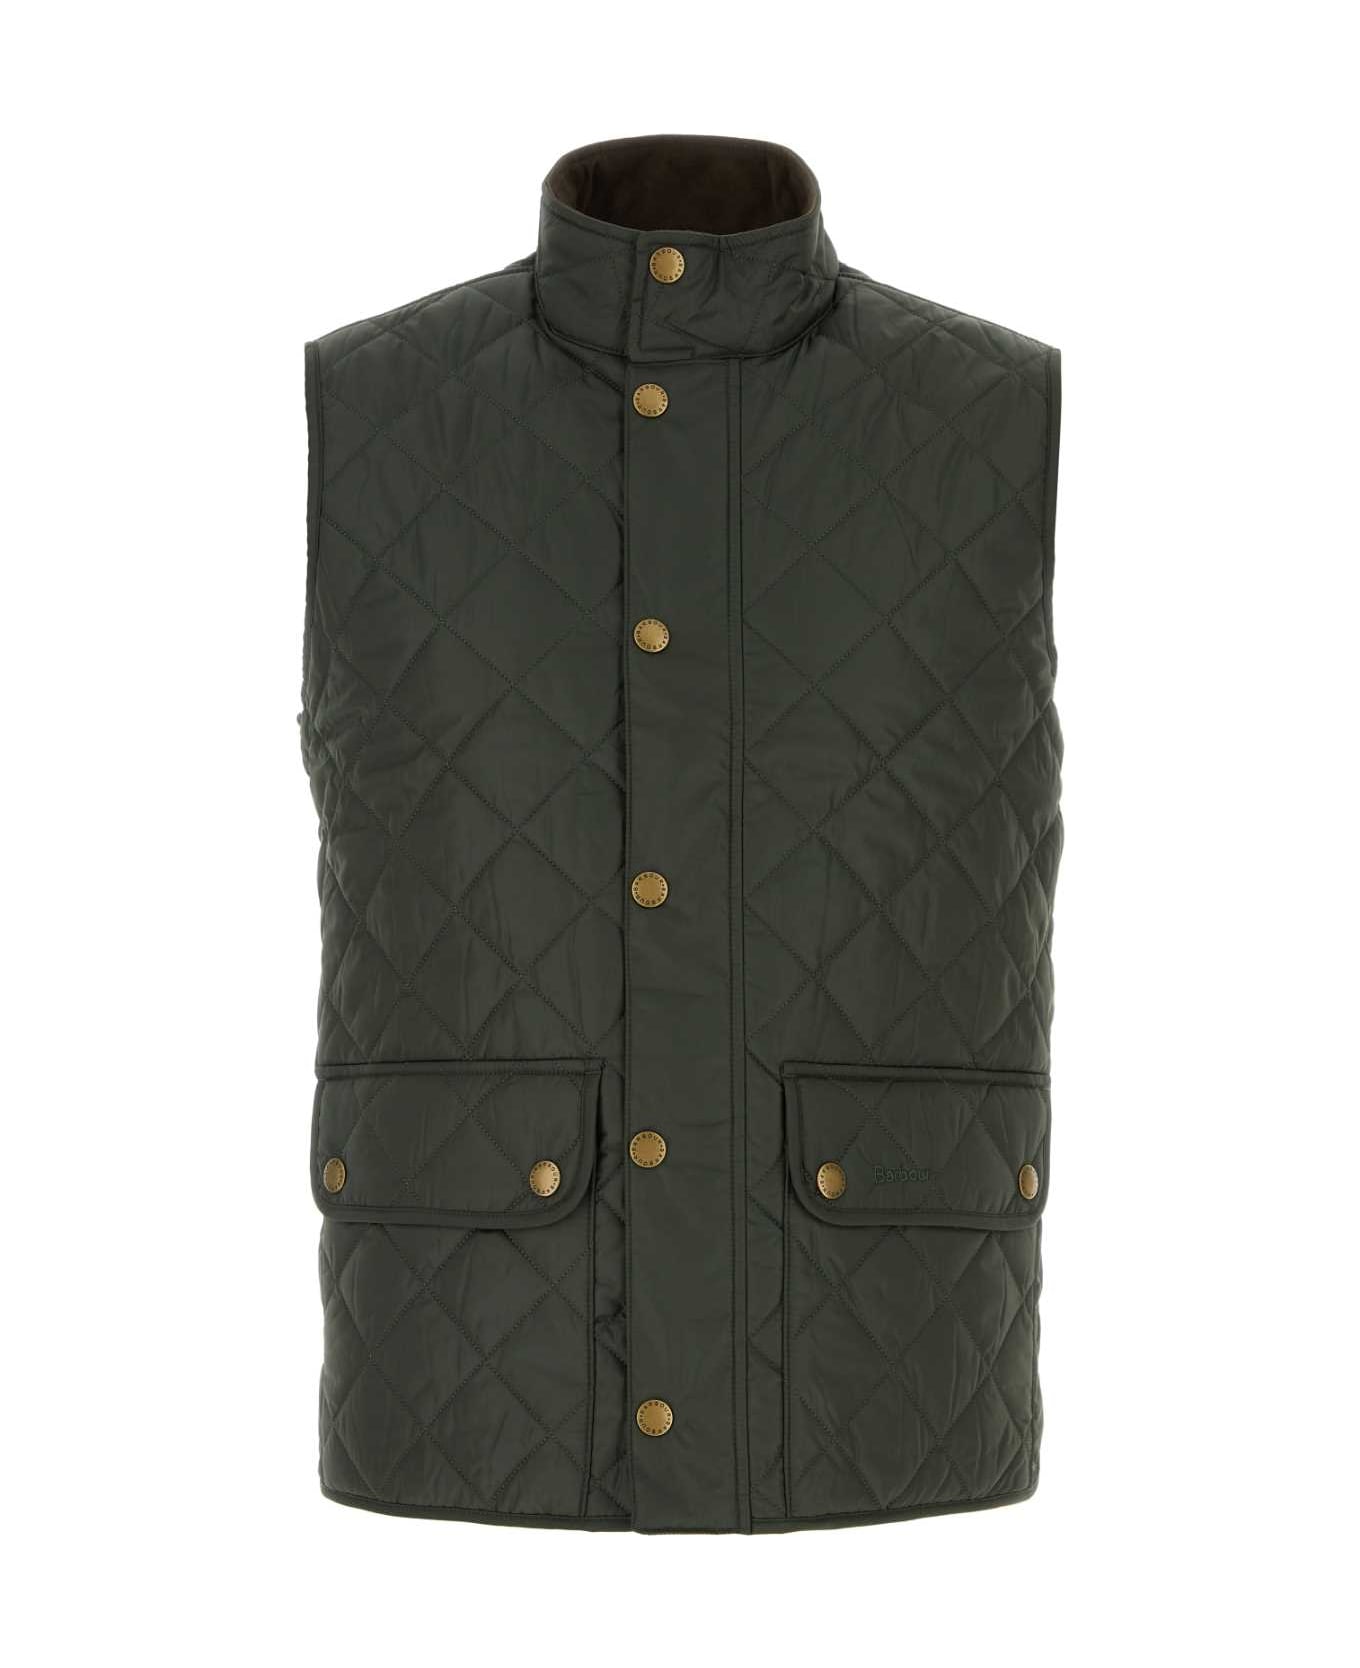 Barbour Olive Green Polyester Lowerdale Sleeveless Jacket - SAGE